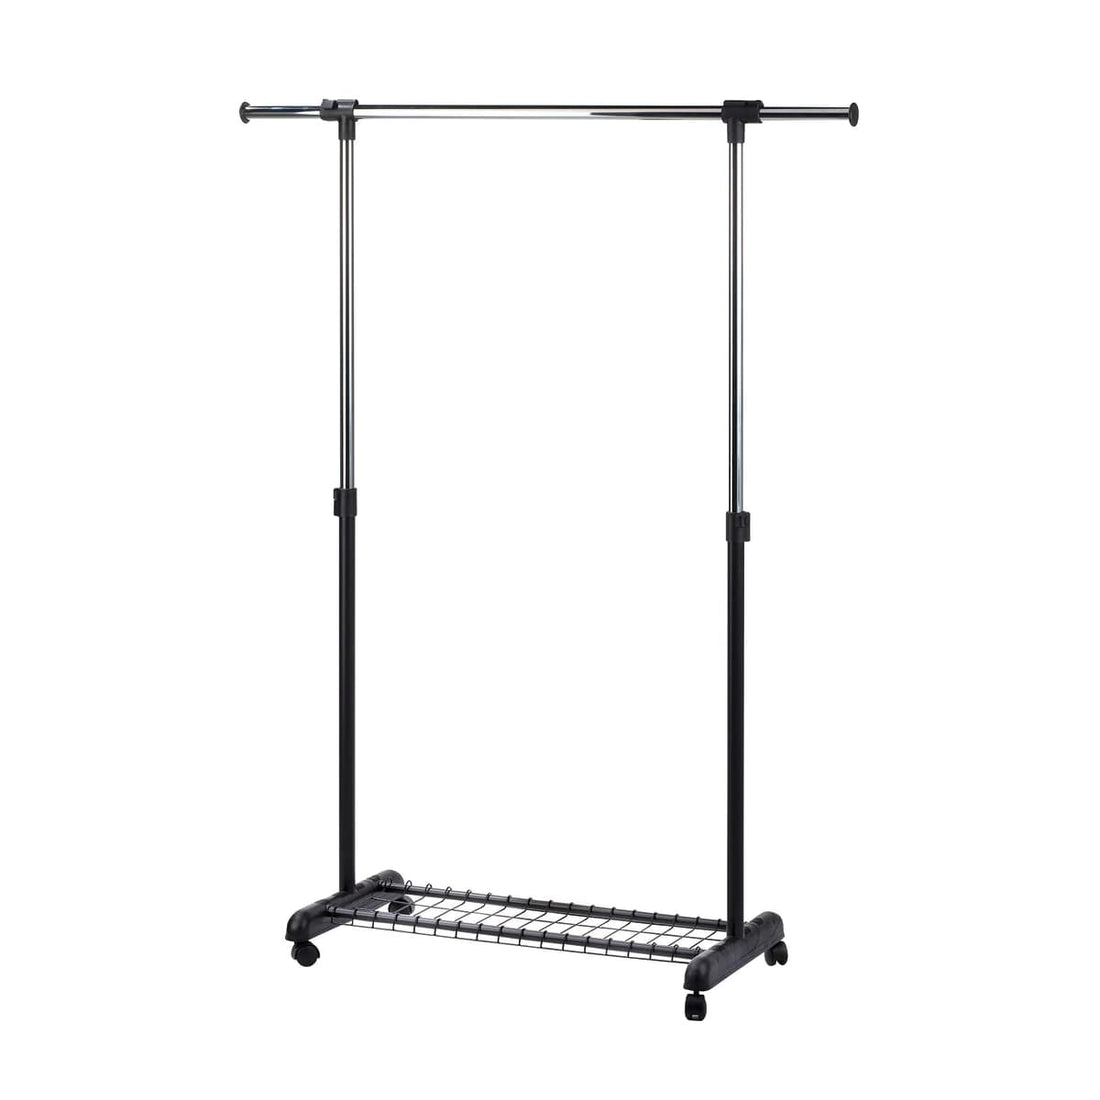 STAND WITH 1 BAR AND WHEELS W86.3xD51xH159CM CHROMIUM-METAL HEIGHT ADJUSTMENT - best price from Maltashopper.com BR410529208